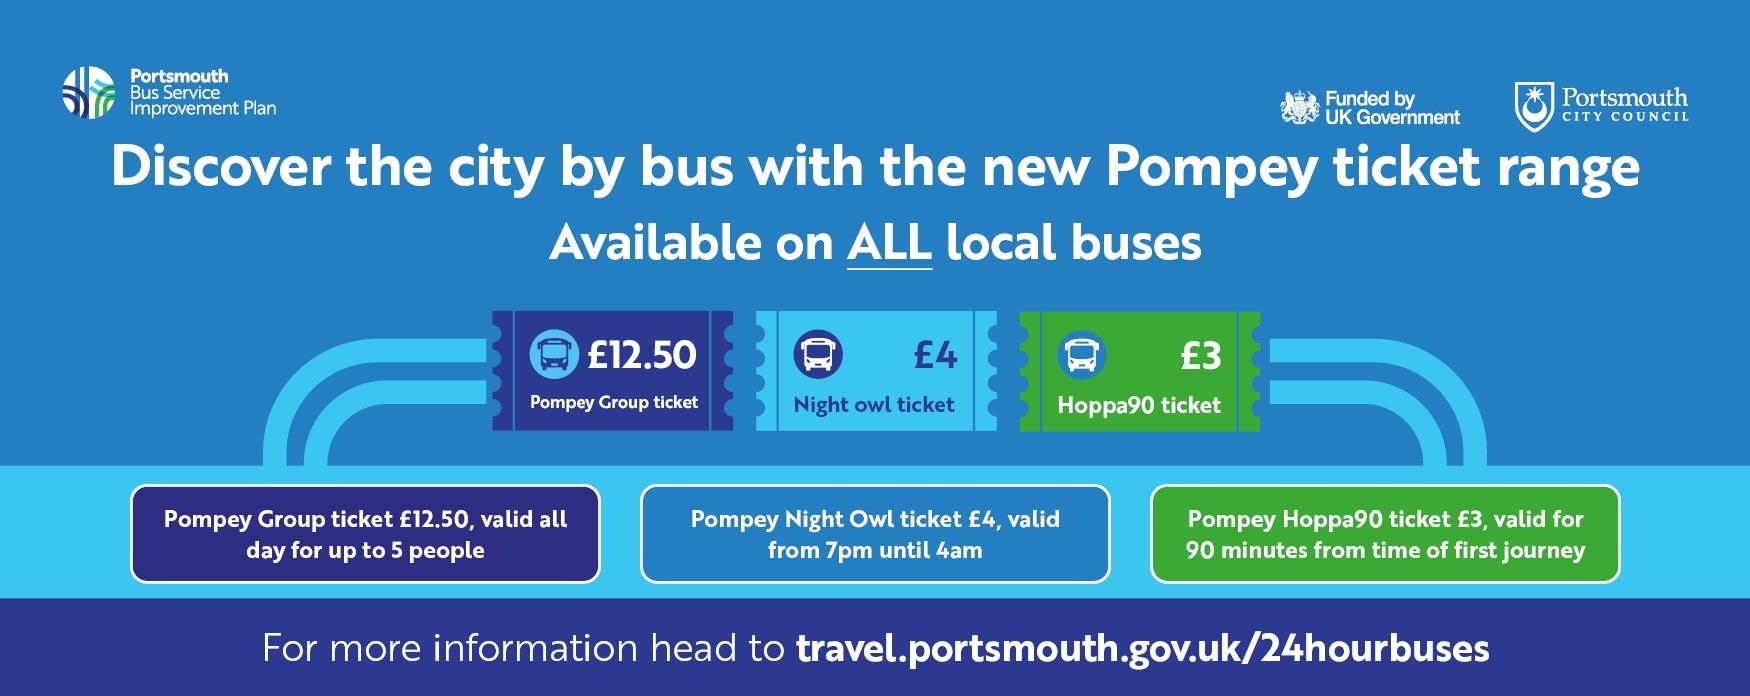 New ticket prices for Portsmouth buses